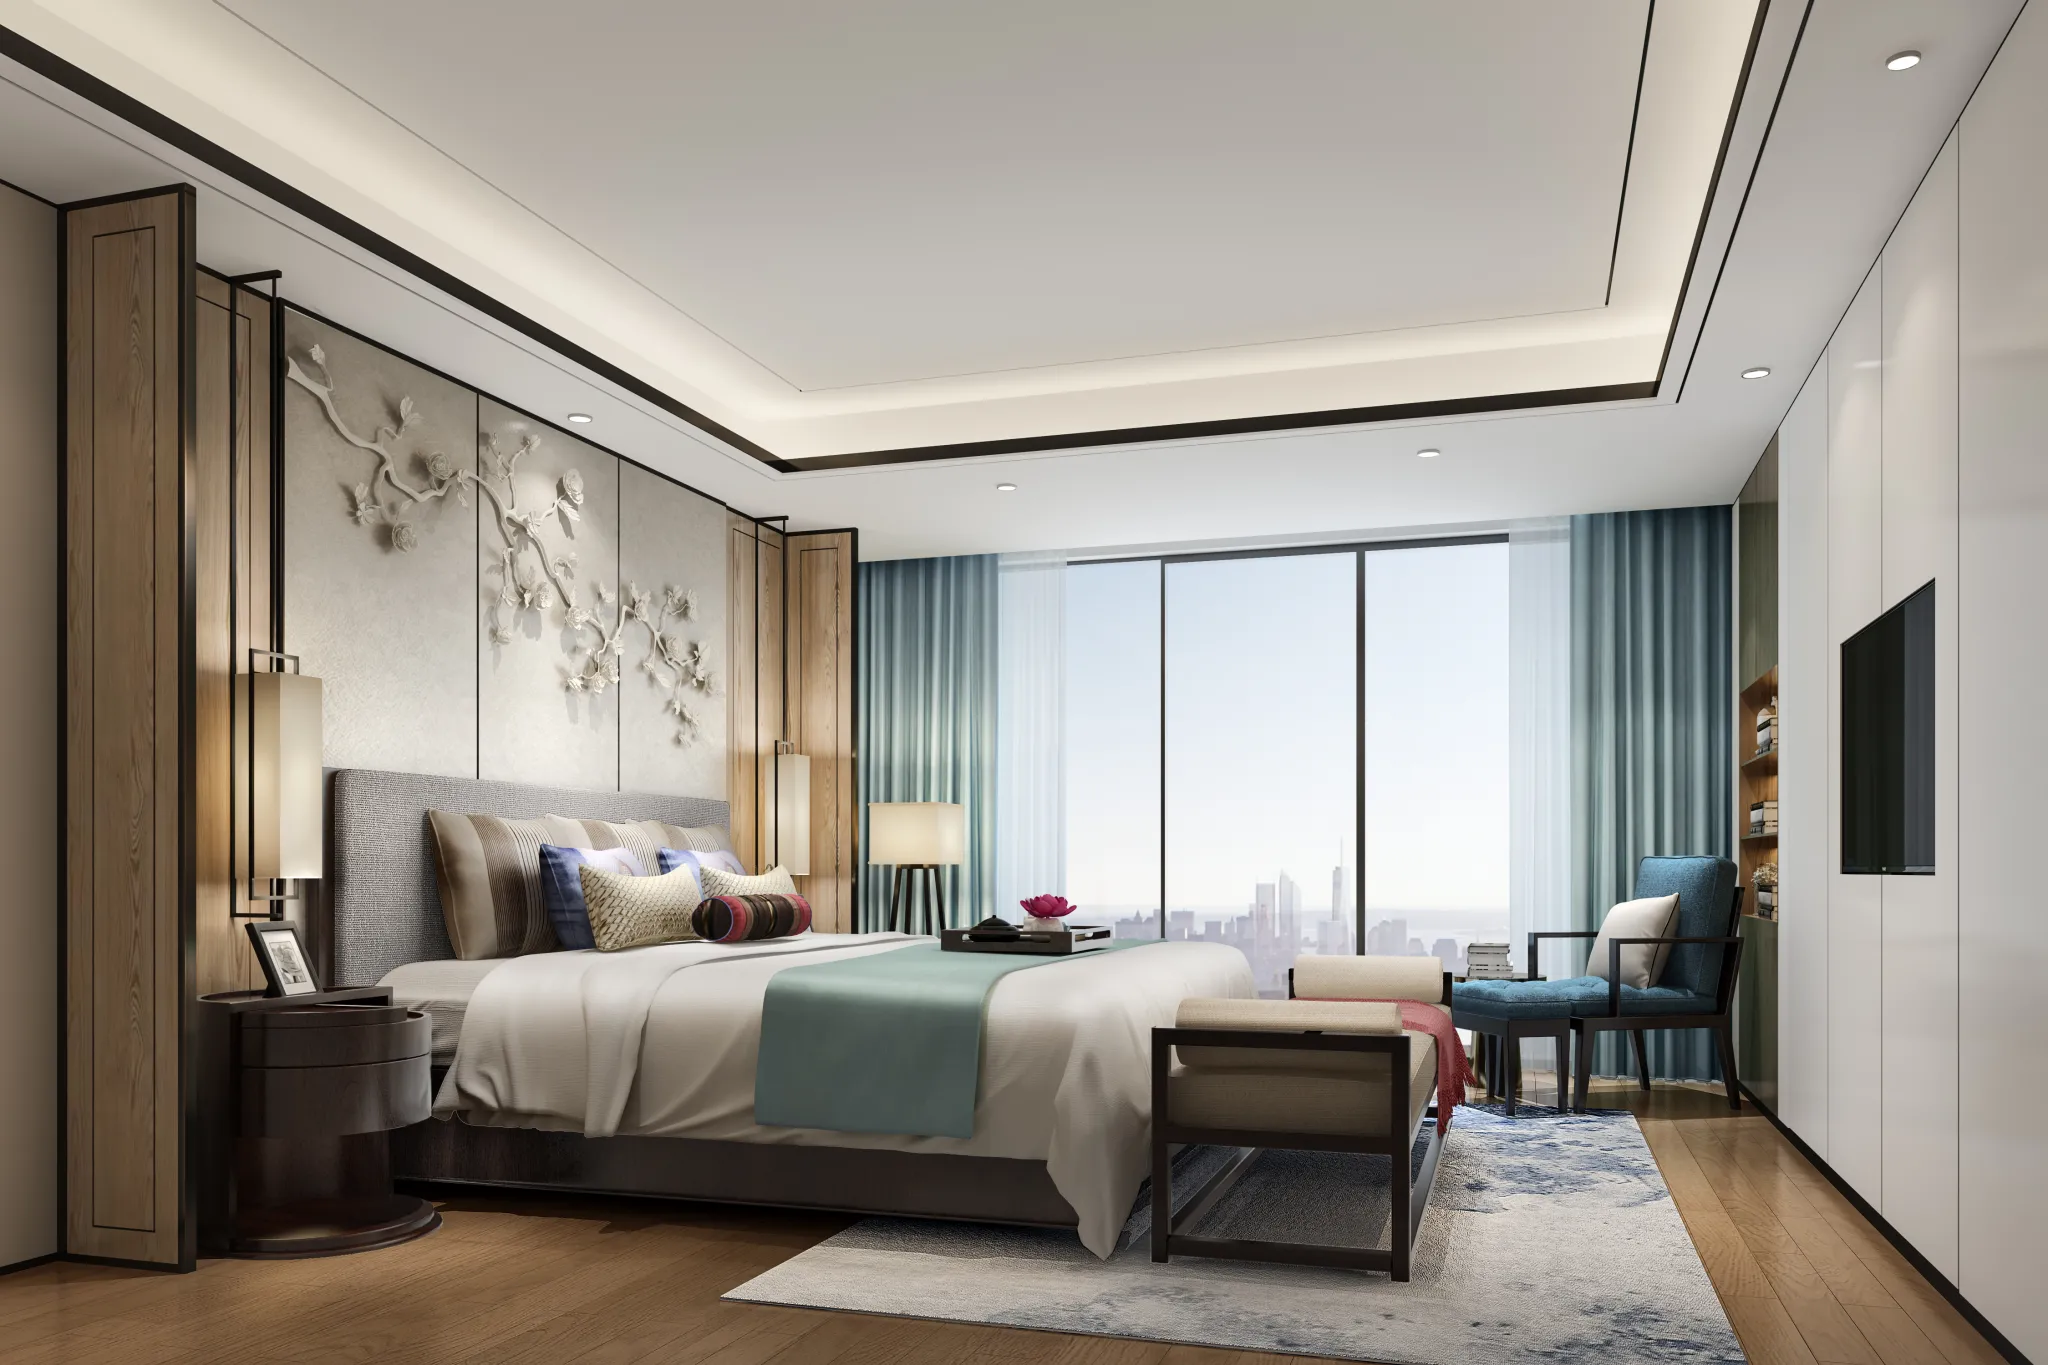 DESMOD INTERIOR 2021 (VRAY)/5. BEDROOM – 2. CHINESE STYLES – 053